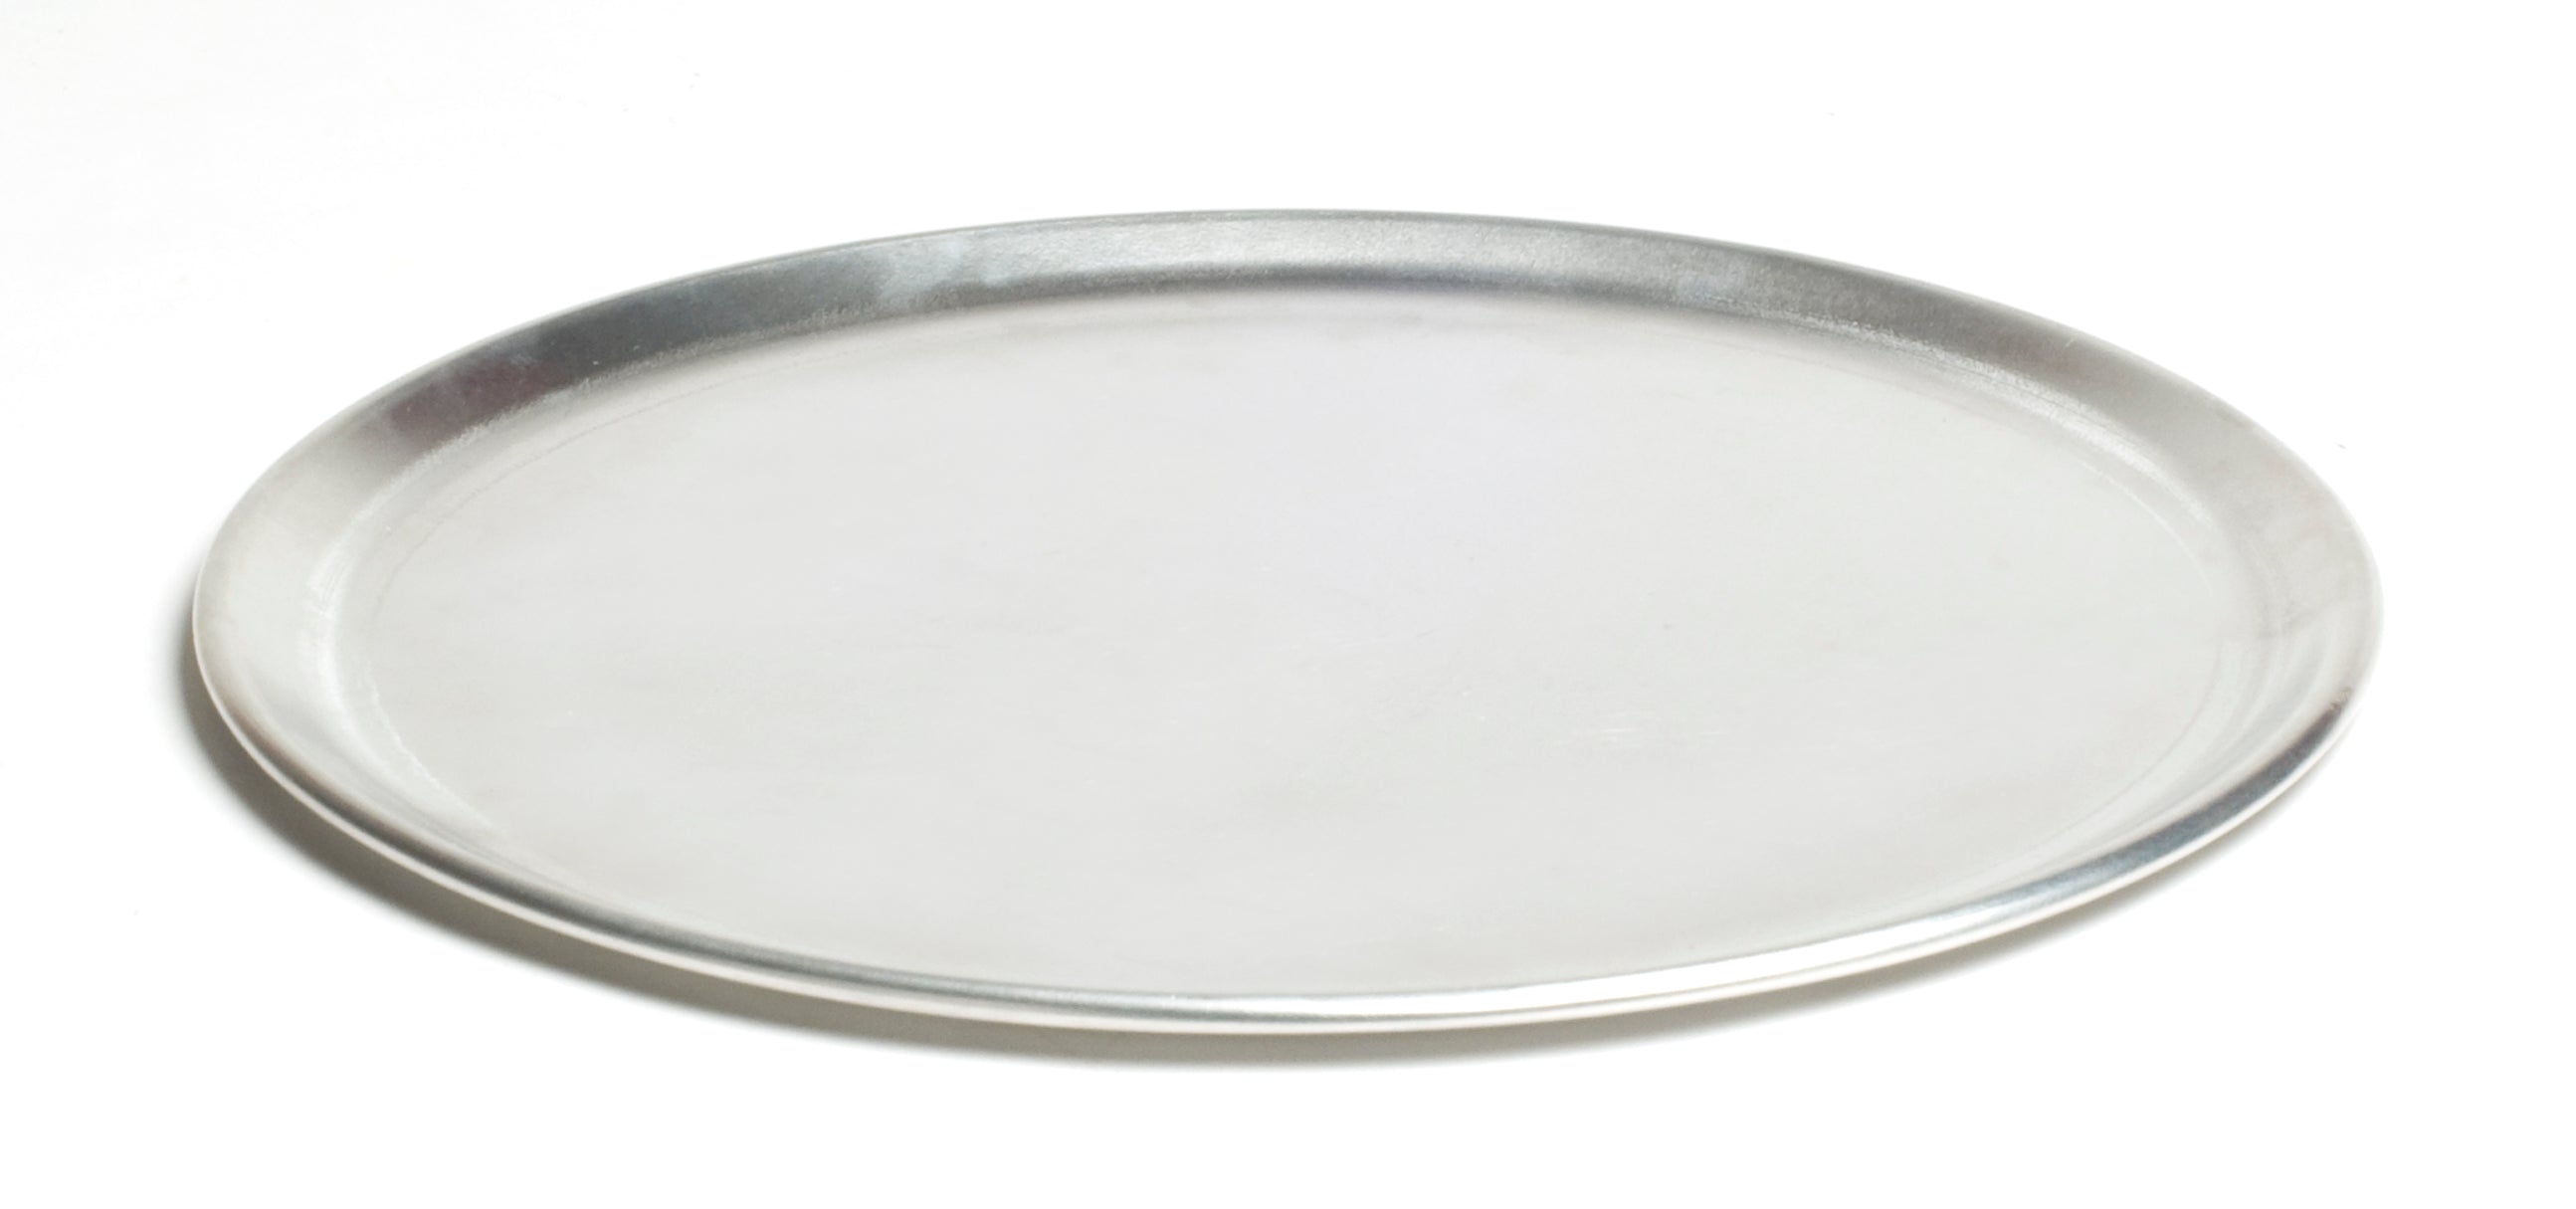 Charcoal Companion 12 inch Round Aluminum Pizza Pan 12042990